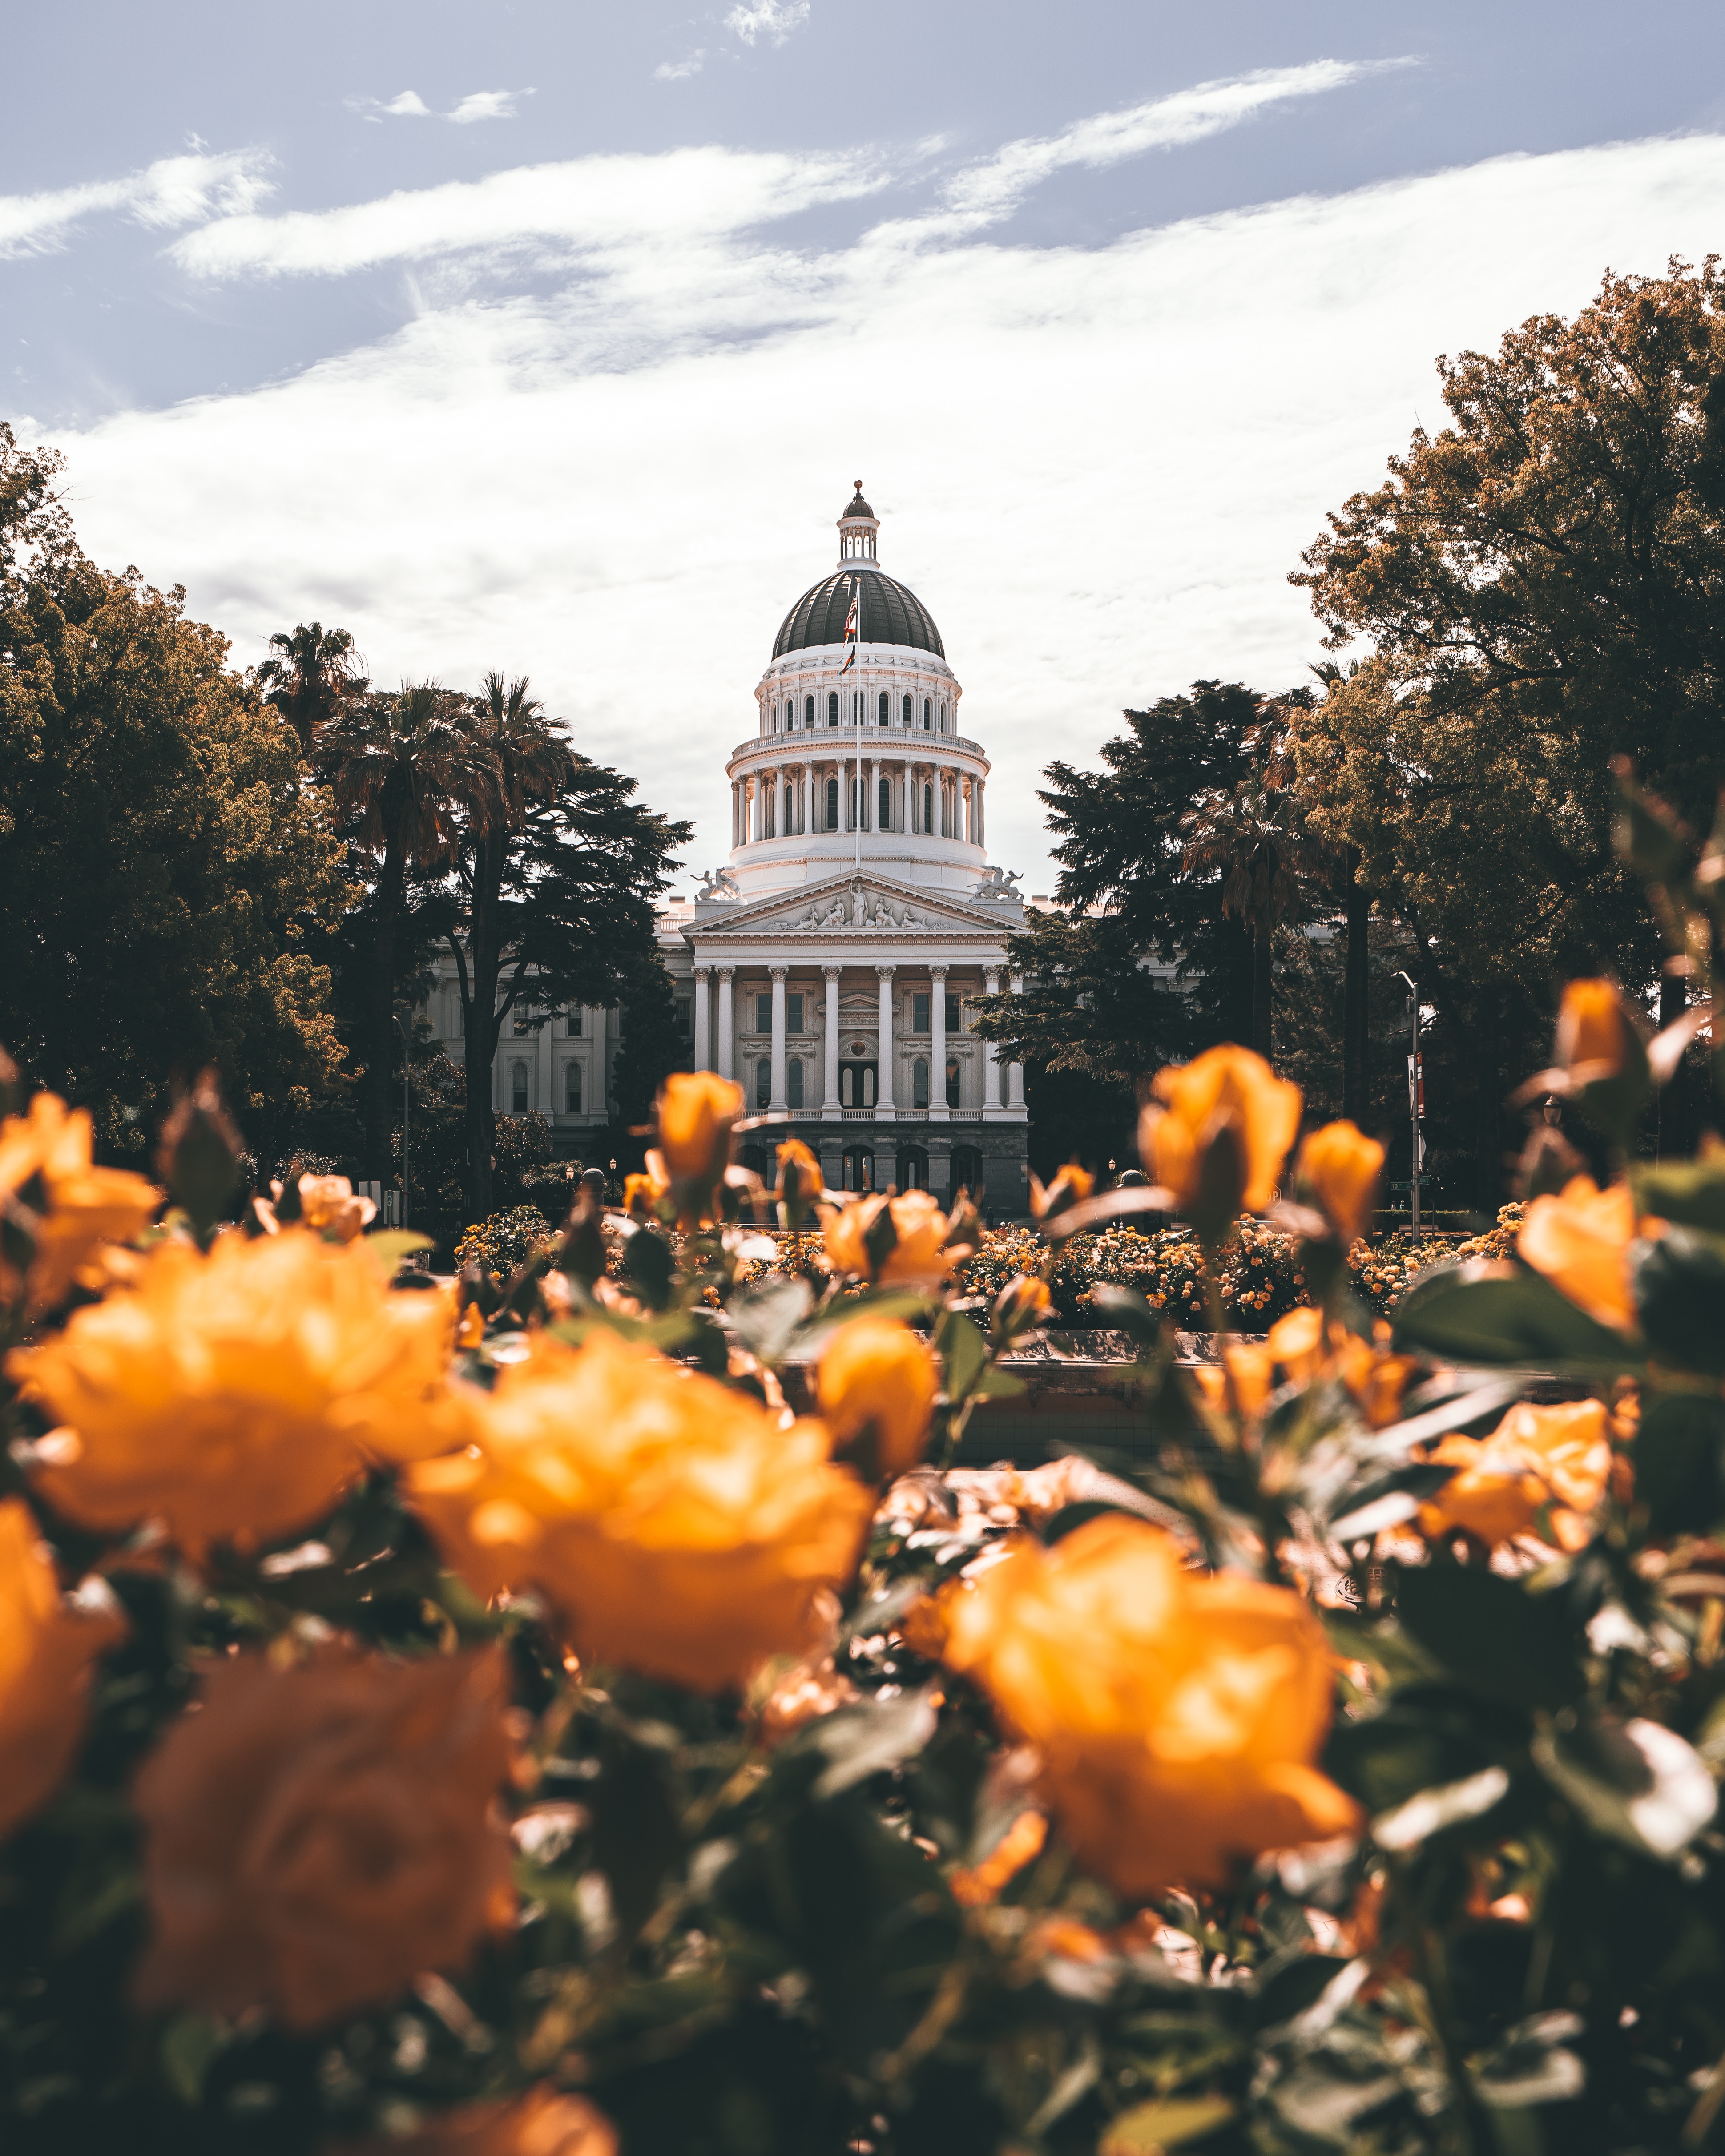 palace, cities, flowers, trees, architecture, building, dome